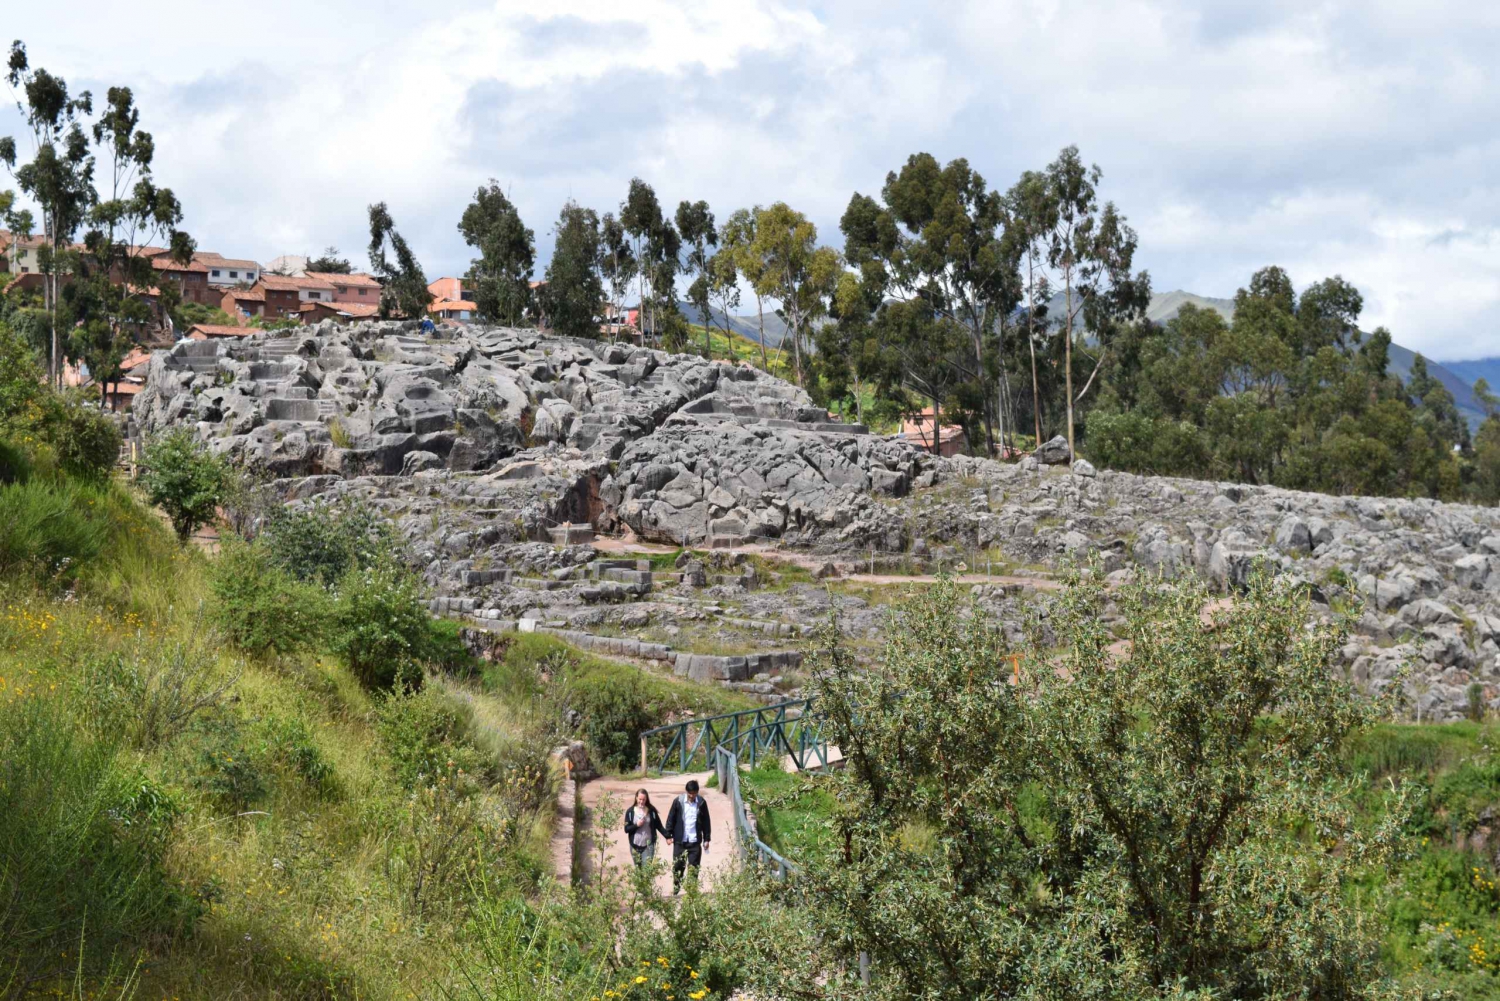 Cusco: Full-Day Sacred Valley Ruins Tour